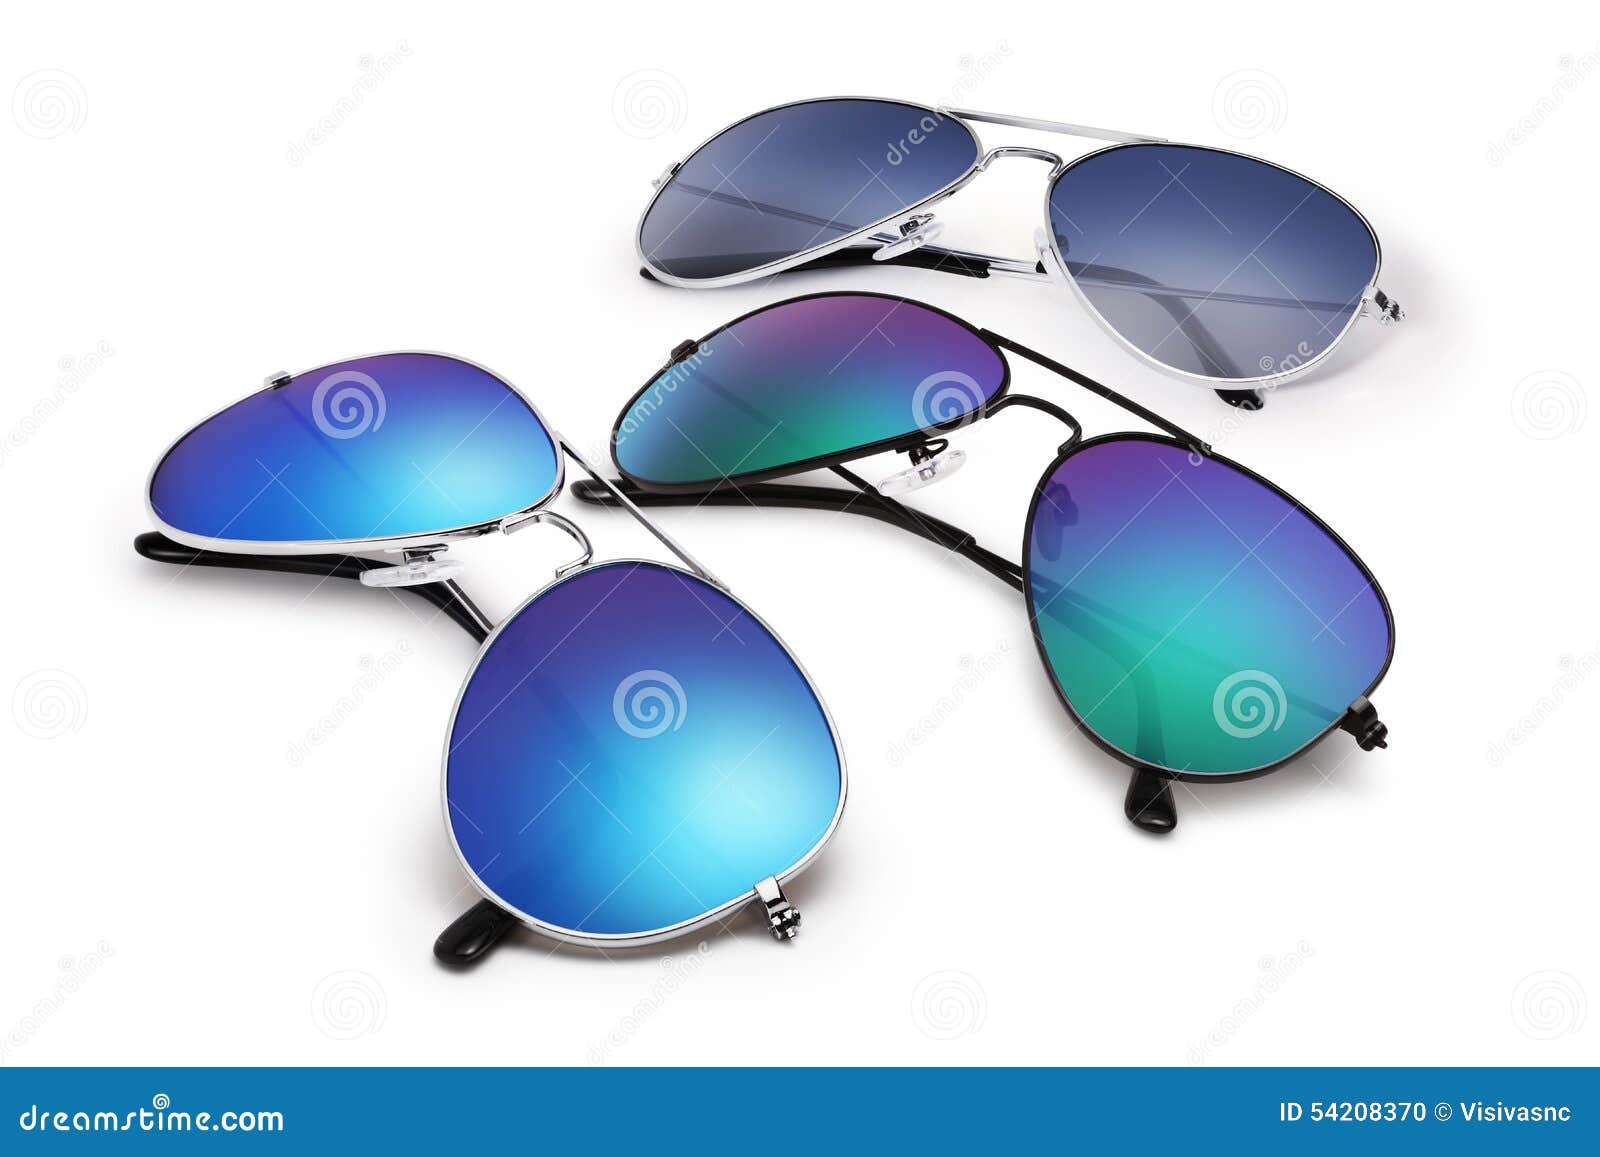 aviator sunglasses  on white background with blue mirror